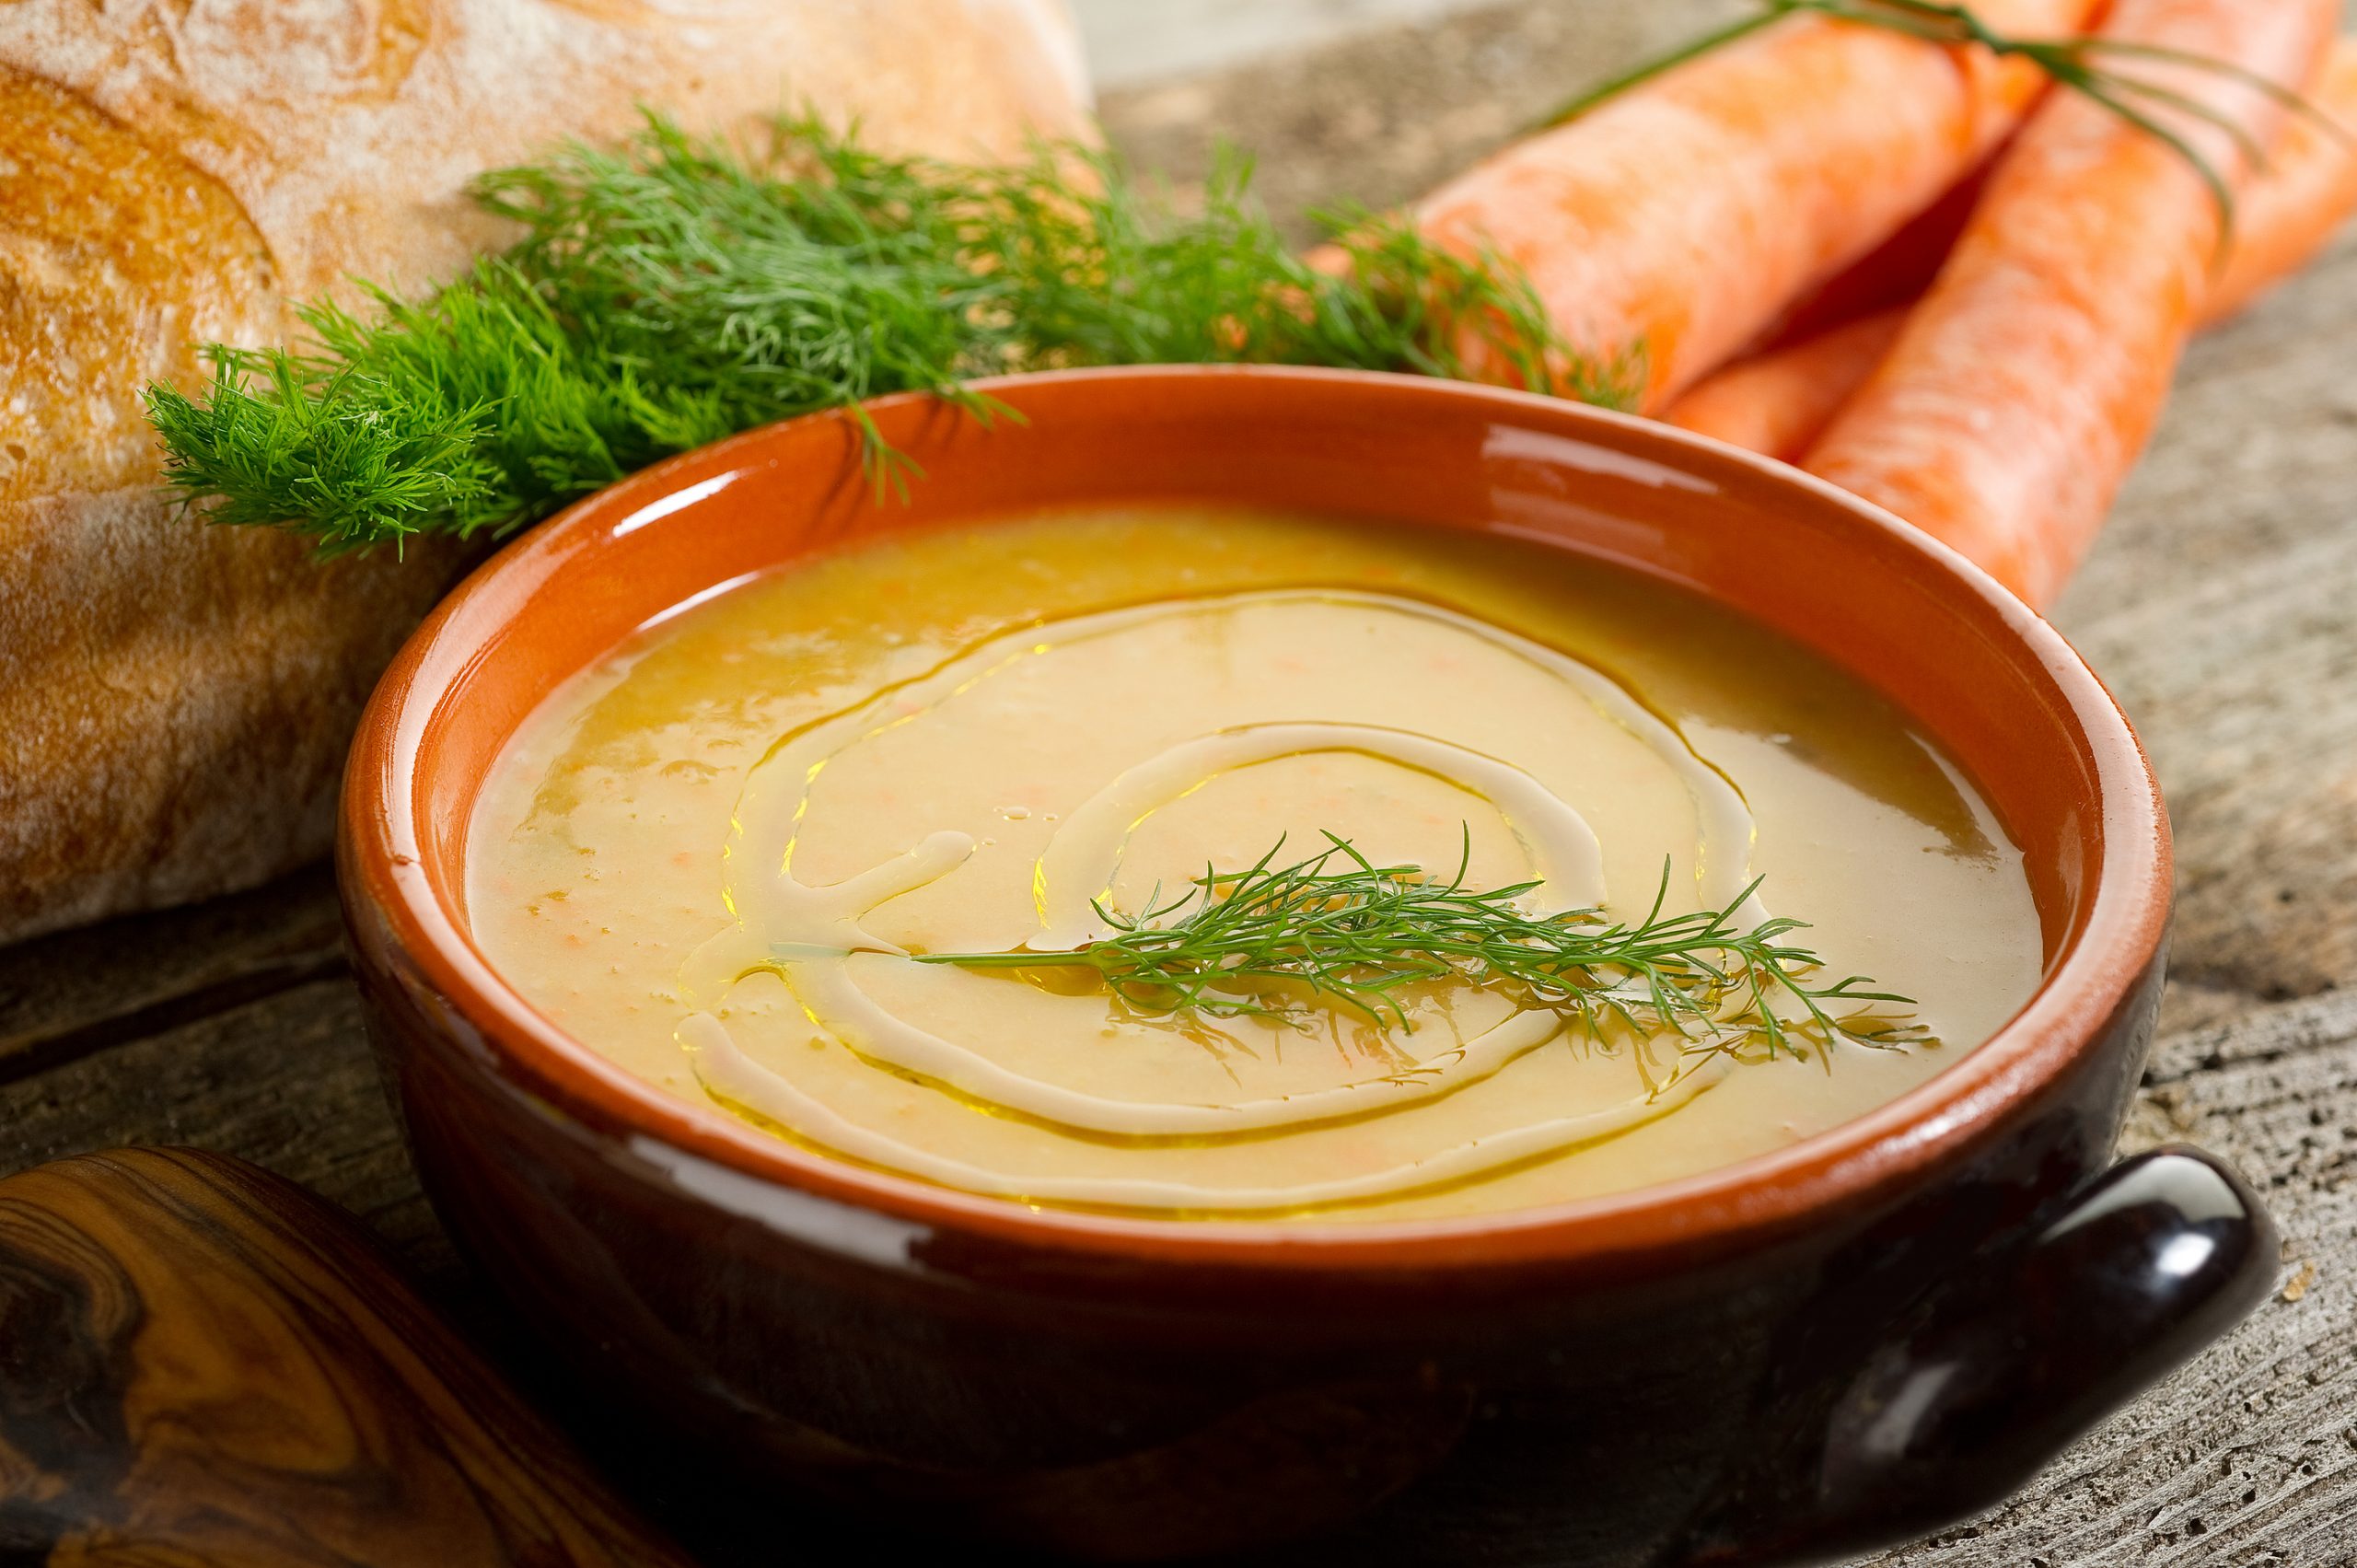 [RECIPE] Carrot-cauliflower soup with a touch of tarragon